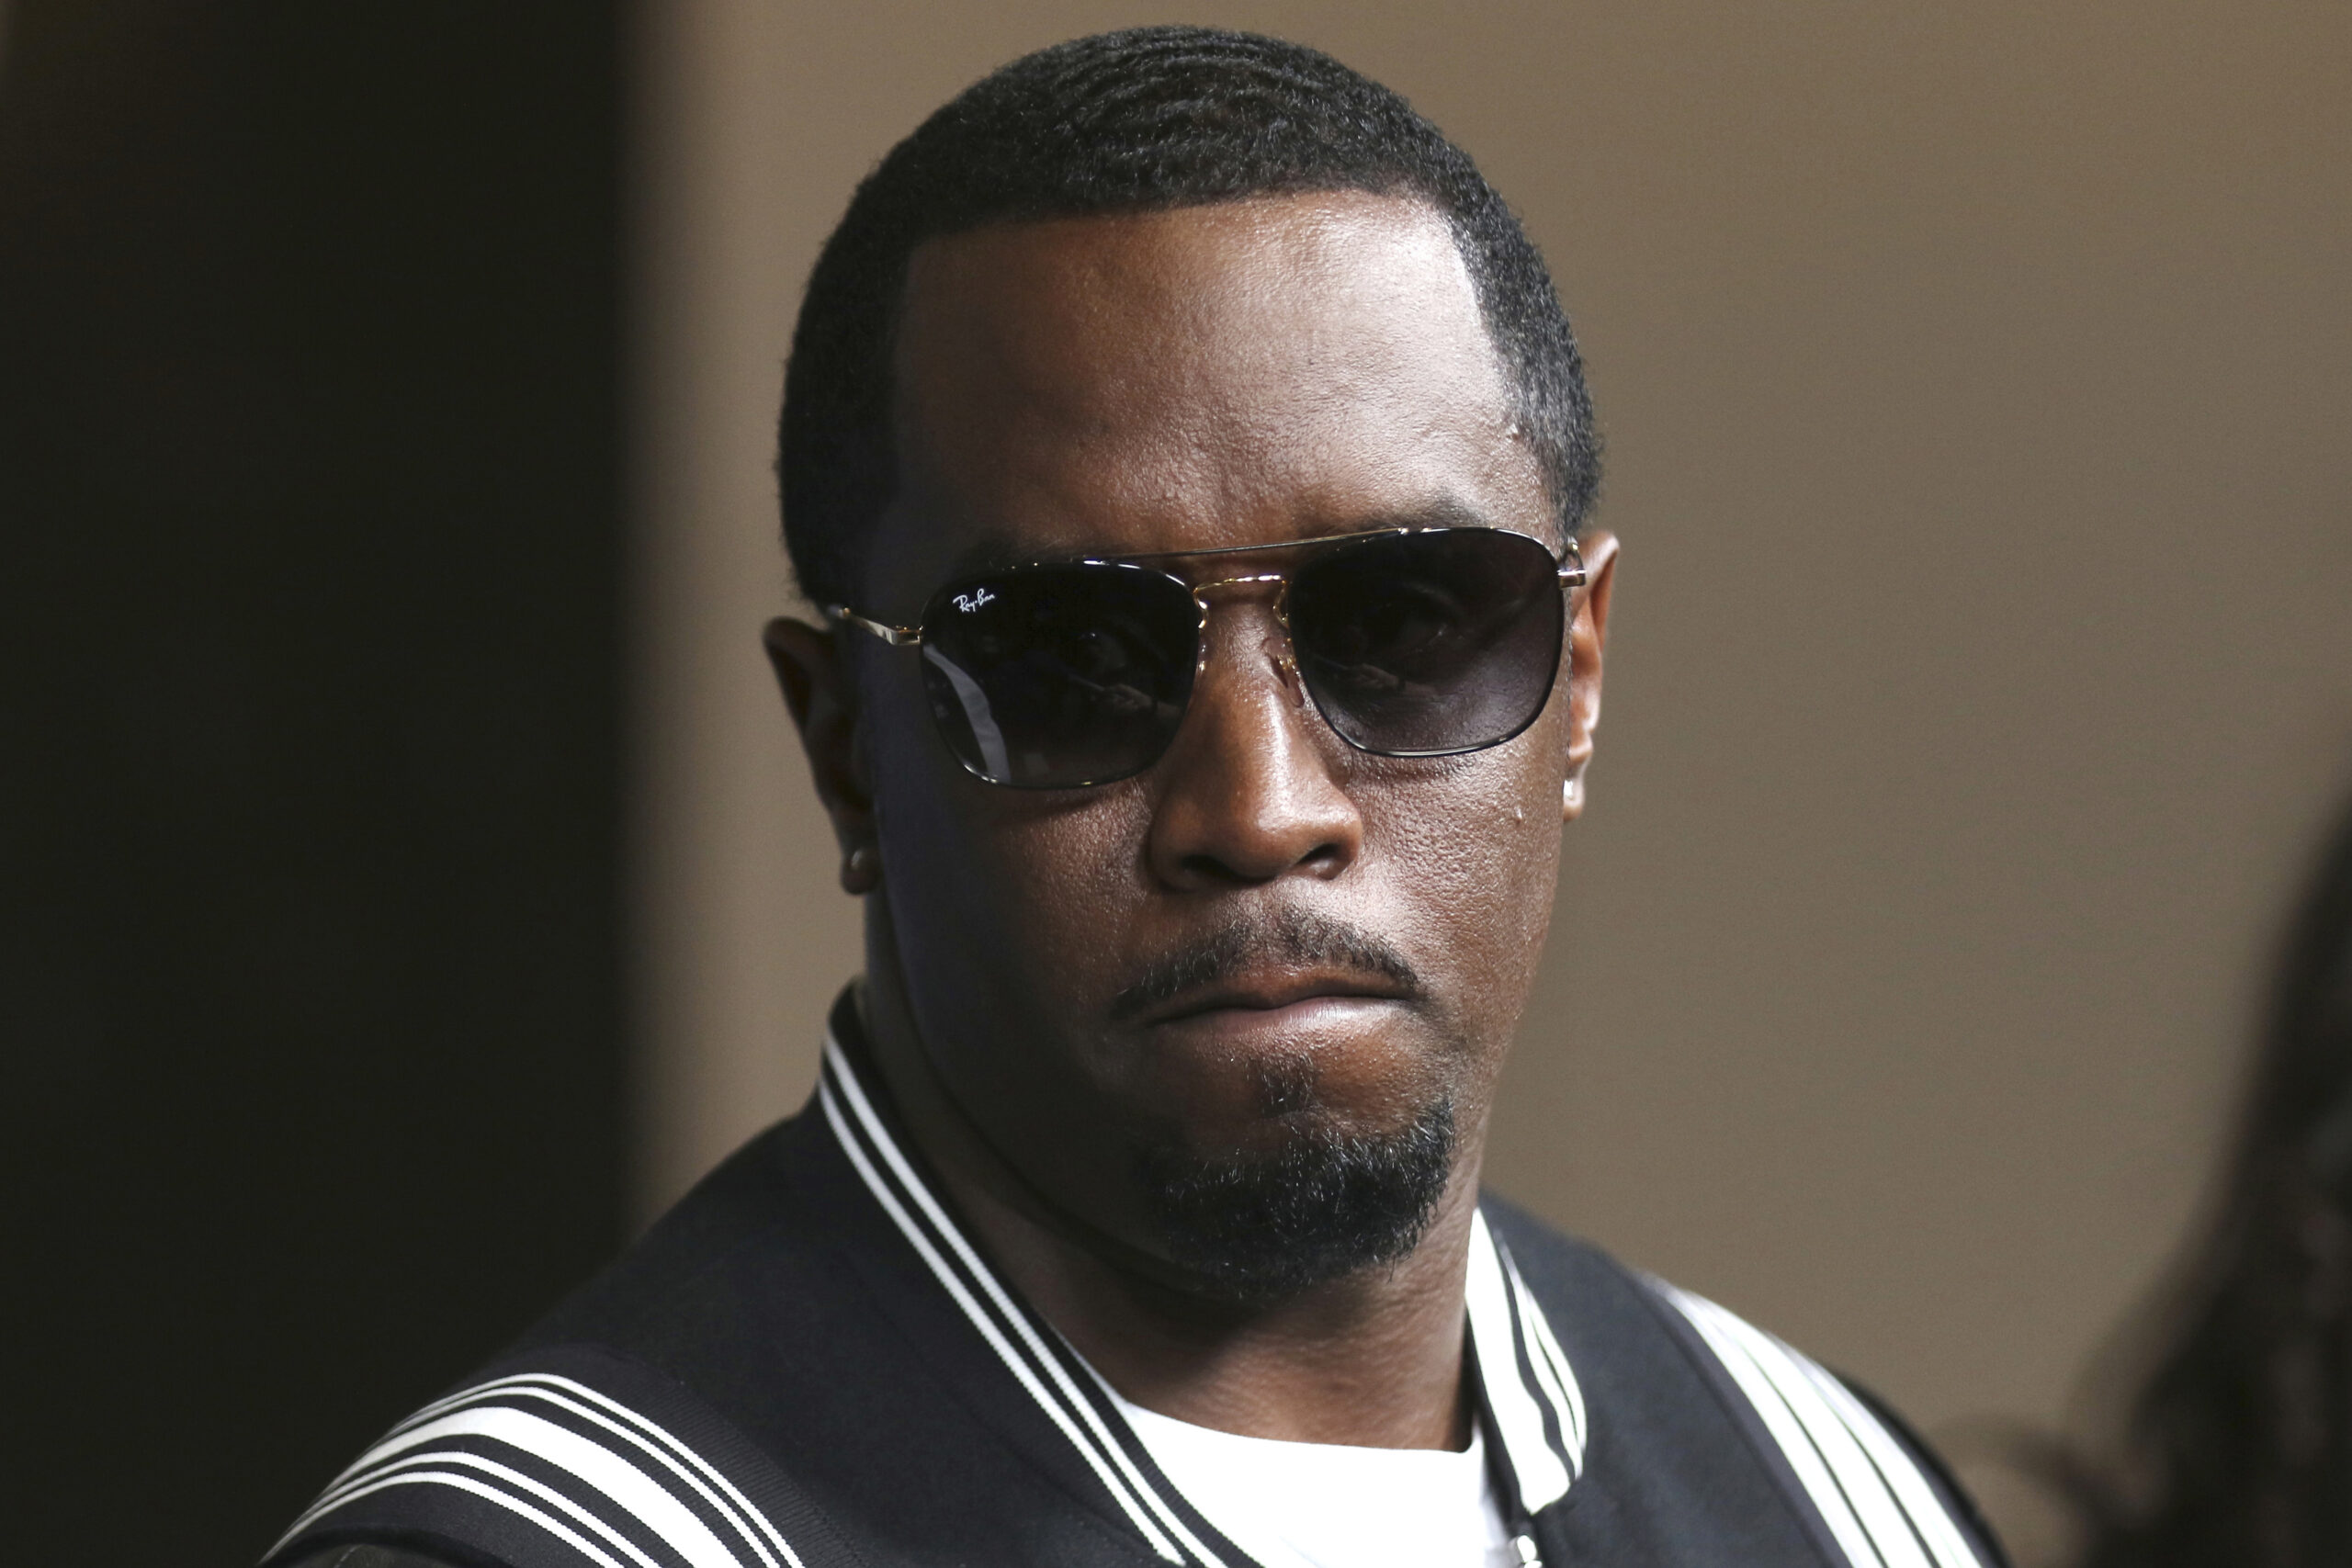 Diddy says sorry for beating girlfriend, calls his behavior ‘disgusting’